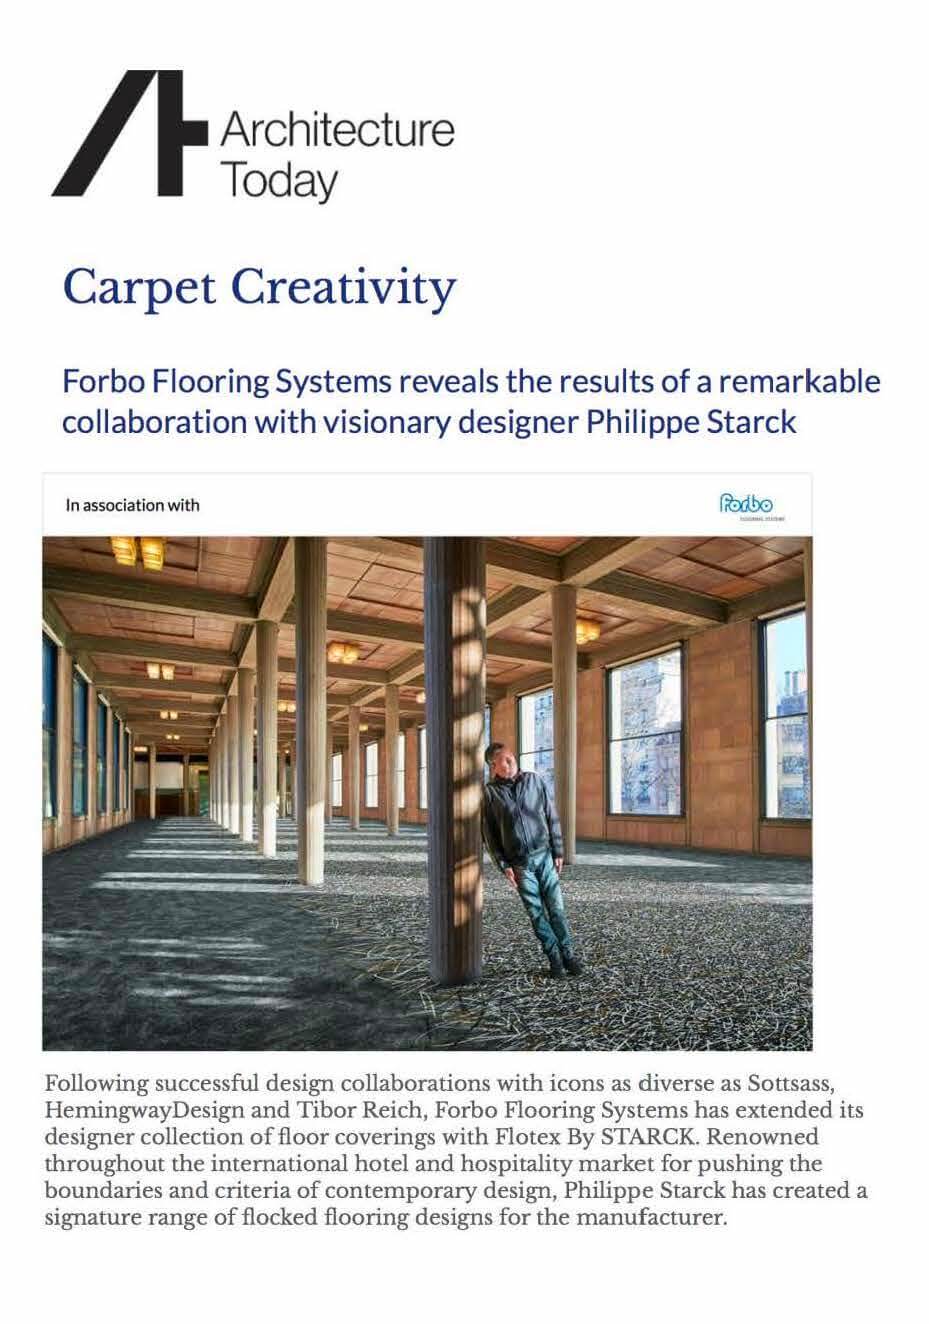 Forbo Flooring Systems reveals the results of a remarkable collaboration with visionary designer Philippe Starck